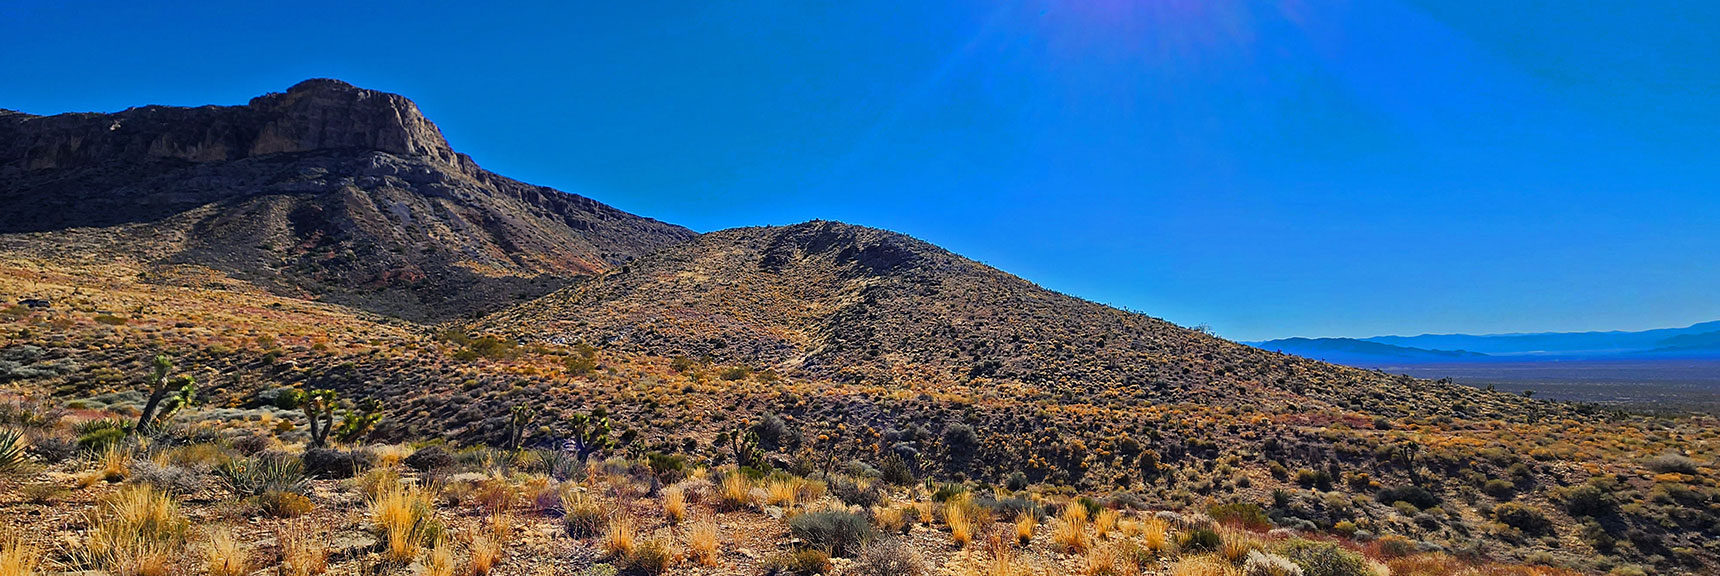 View South Beyond the Second Canyon. Now Traversing West Side of the Bluff | Landmark Bluff Circuit | Lovell Canyon, Nevada